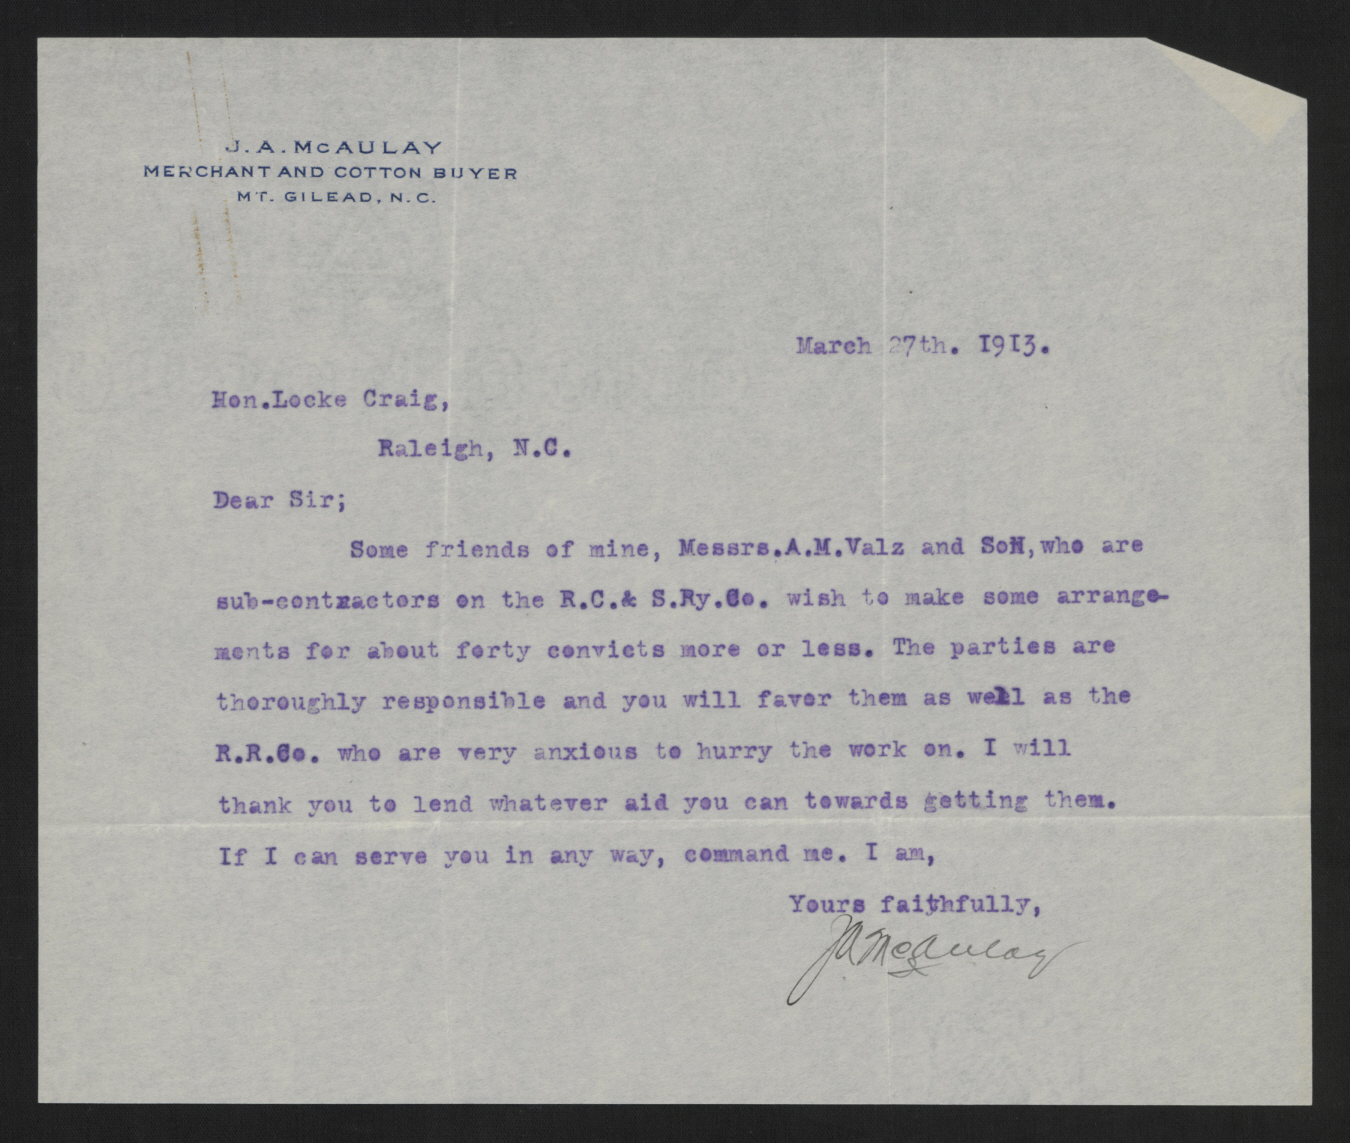 Letter from McAulay to Craig, March 27, 1913